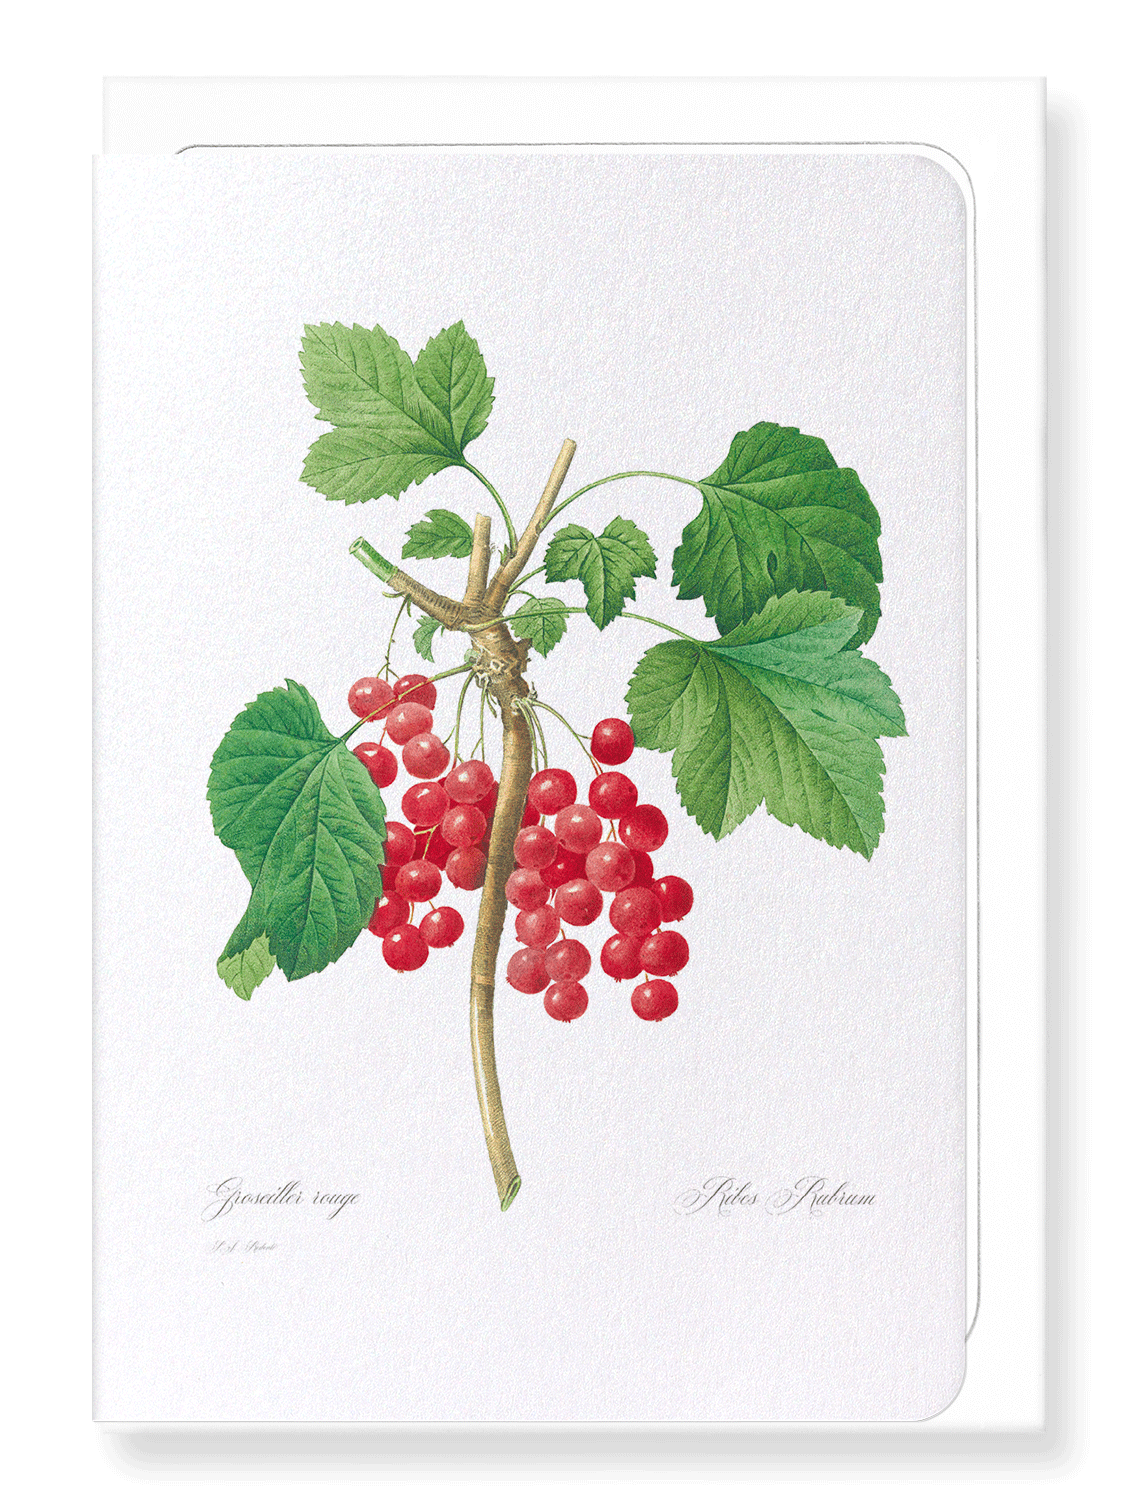 RED CURRANTS